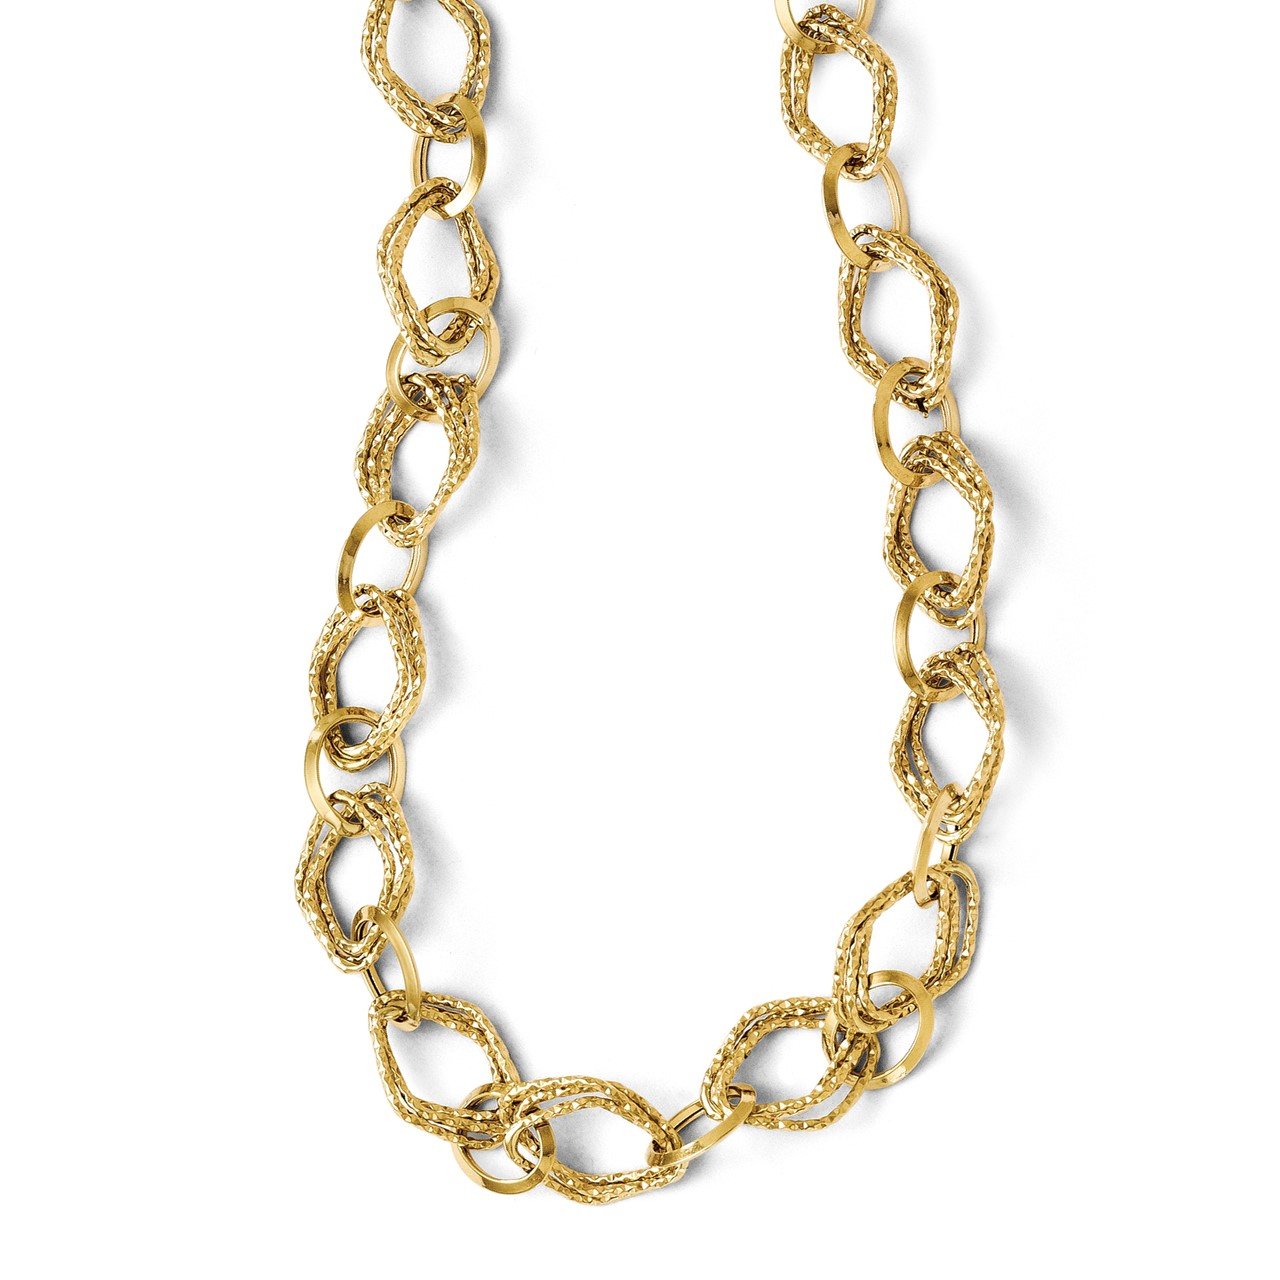 Leslies 14k Polished and Textured Fancy Link with 2in ext. Necklace